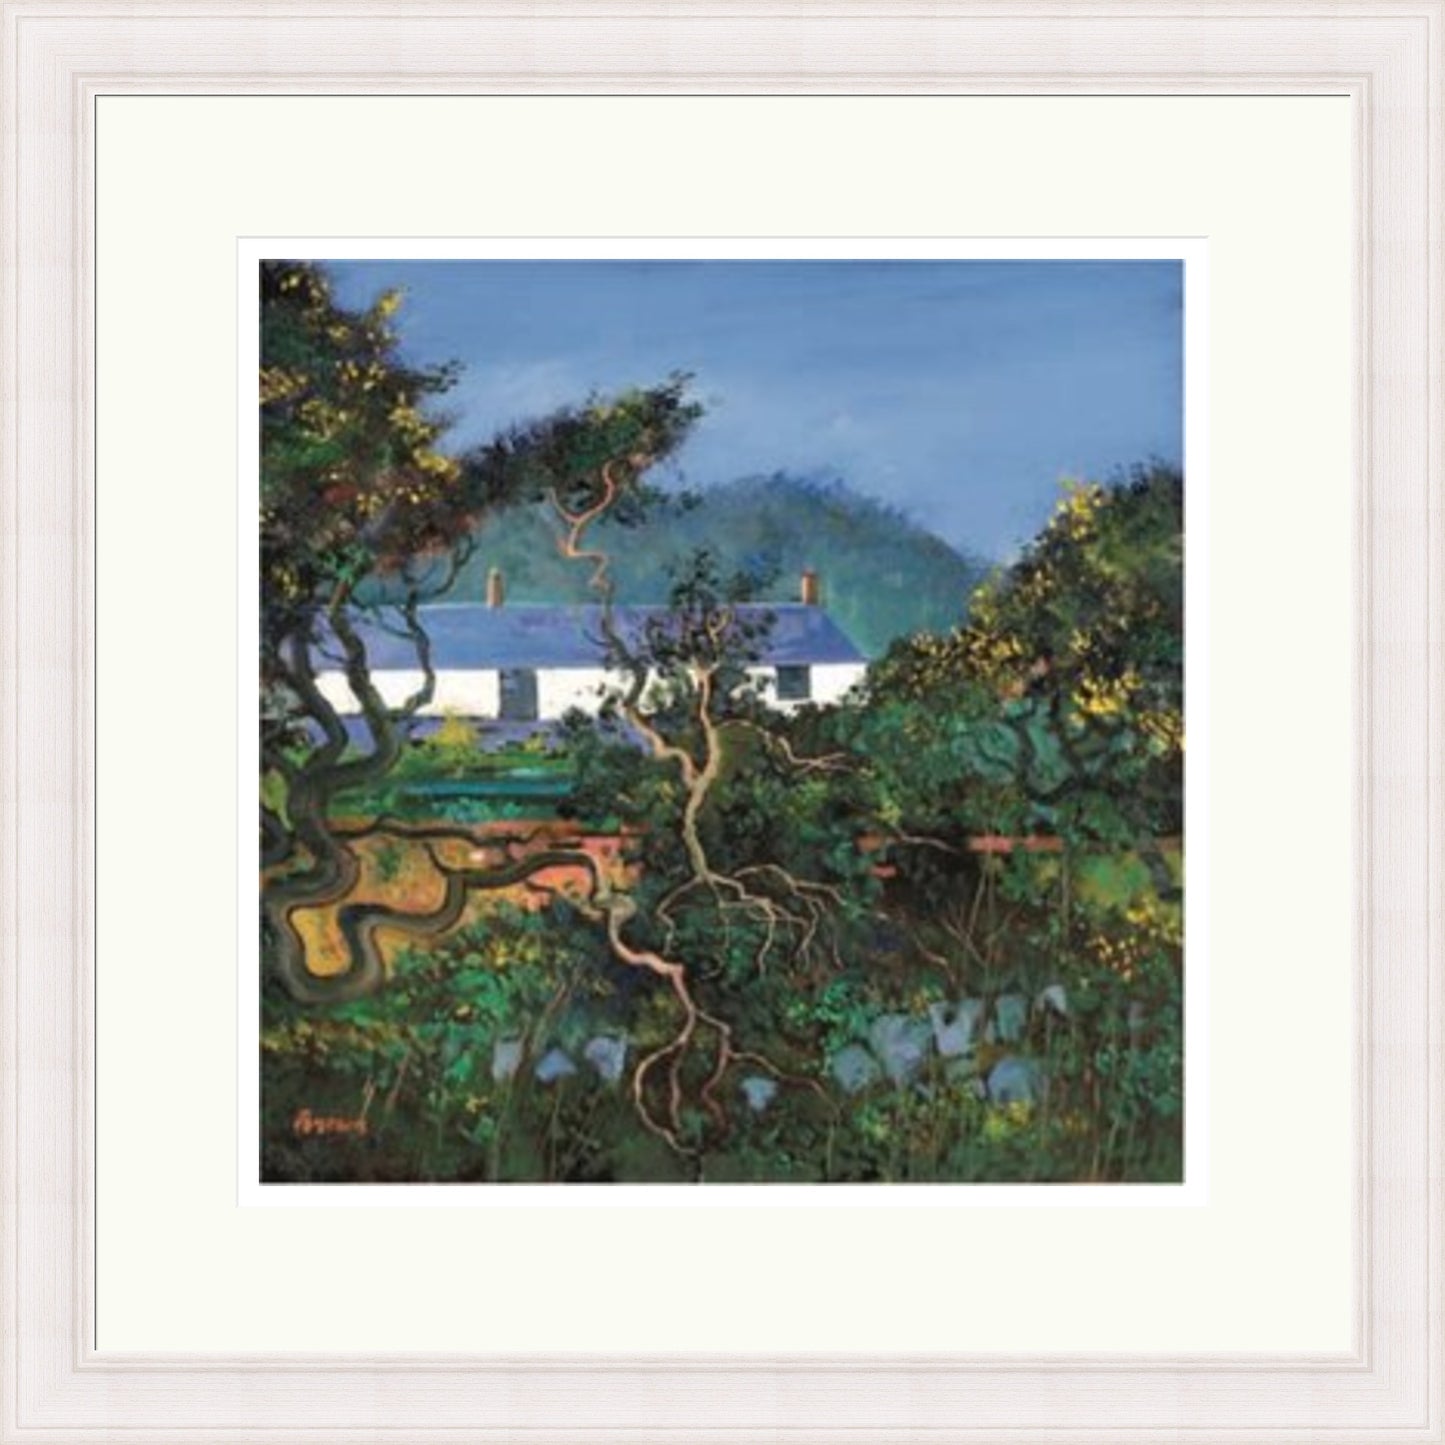 Last One - Cottages with Gorse Bushes (Signed Limited Edition) by Davy Brown